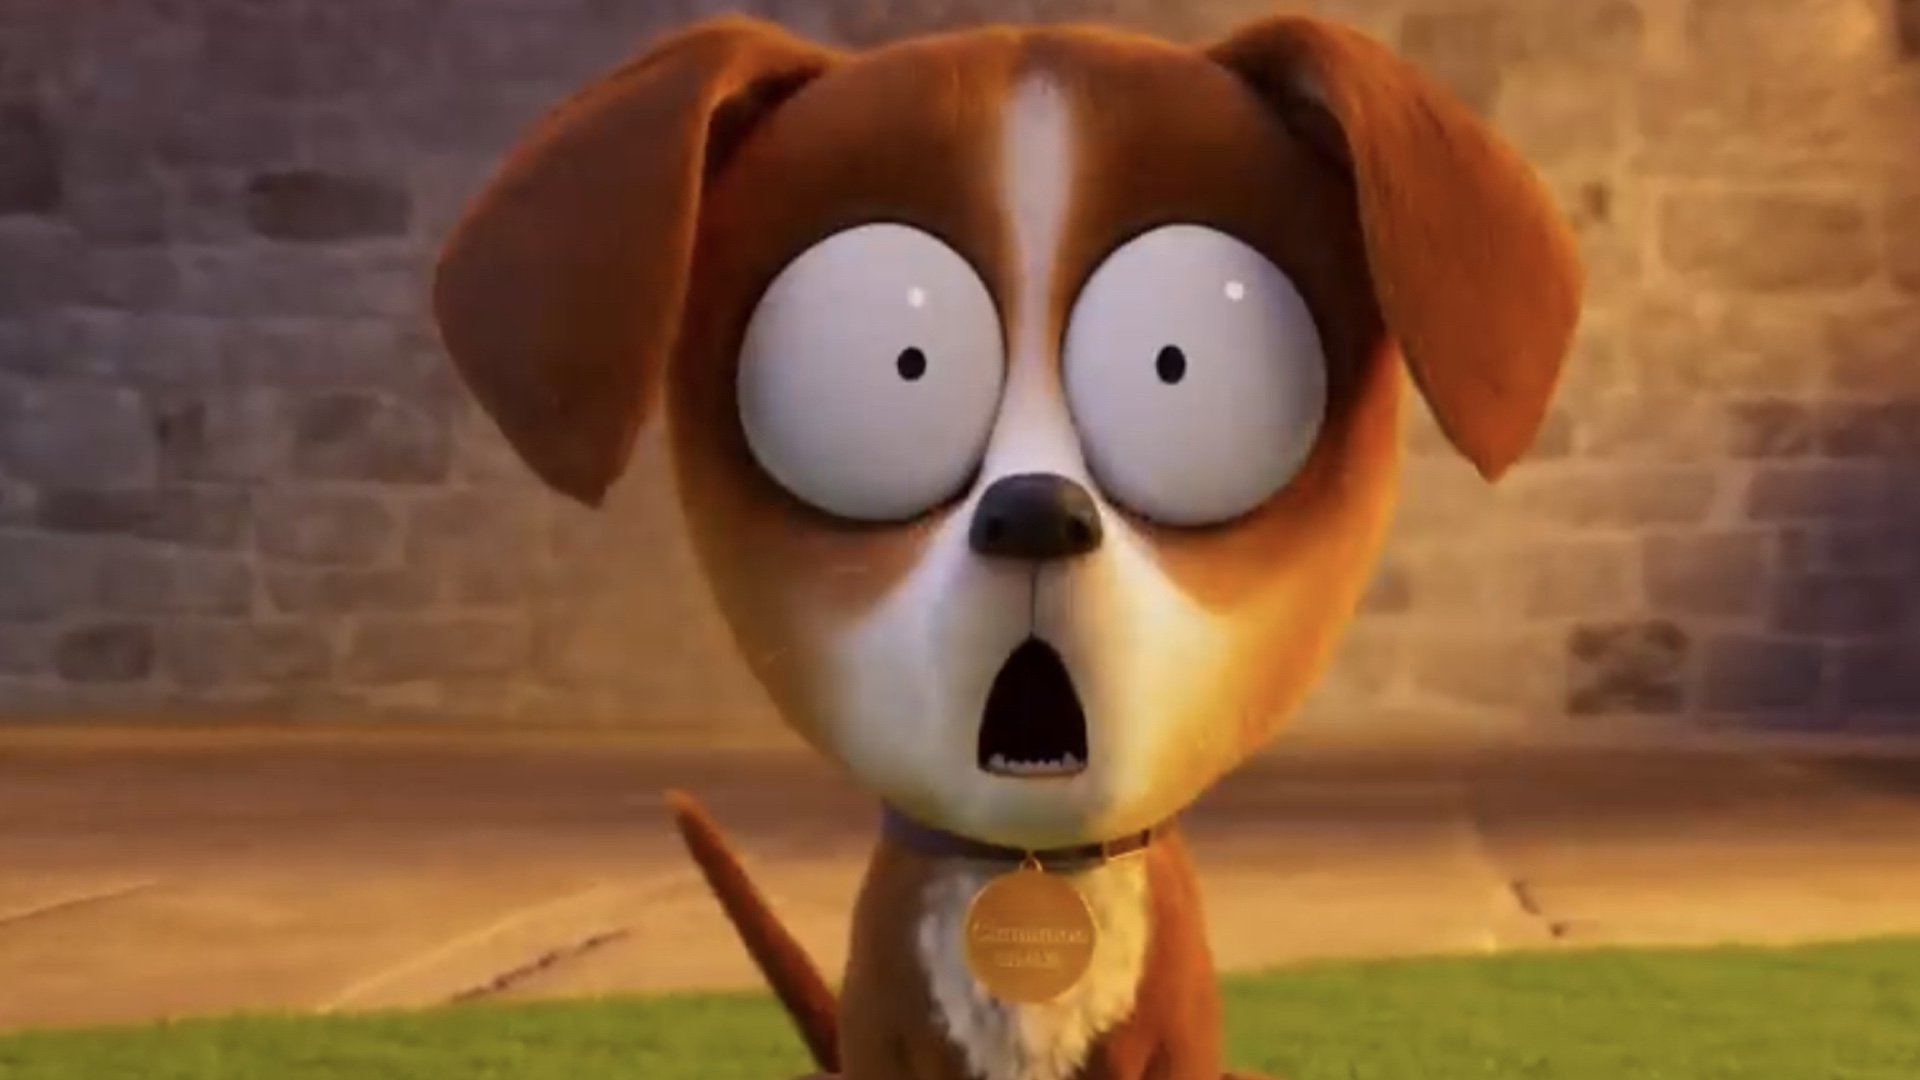 Fixed' First Look: Genndy Tartakovsky Previews His R-Rated Dog's Life Movie  at Annecy